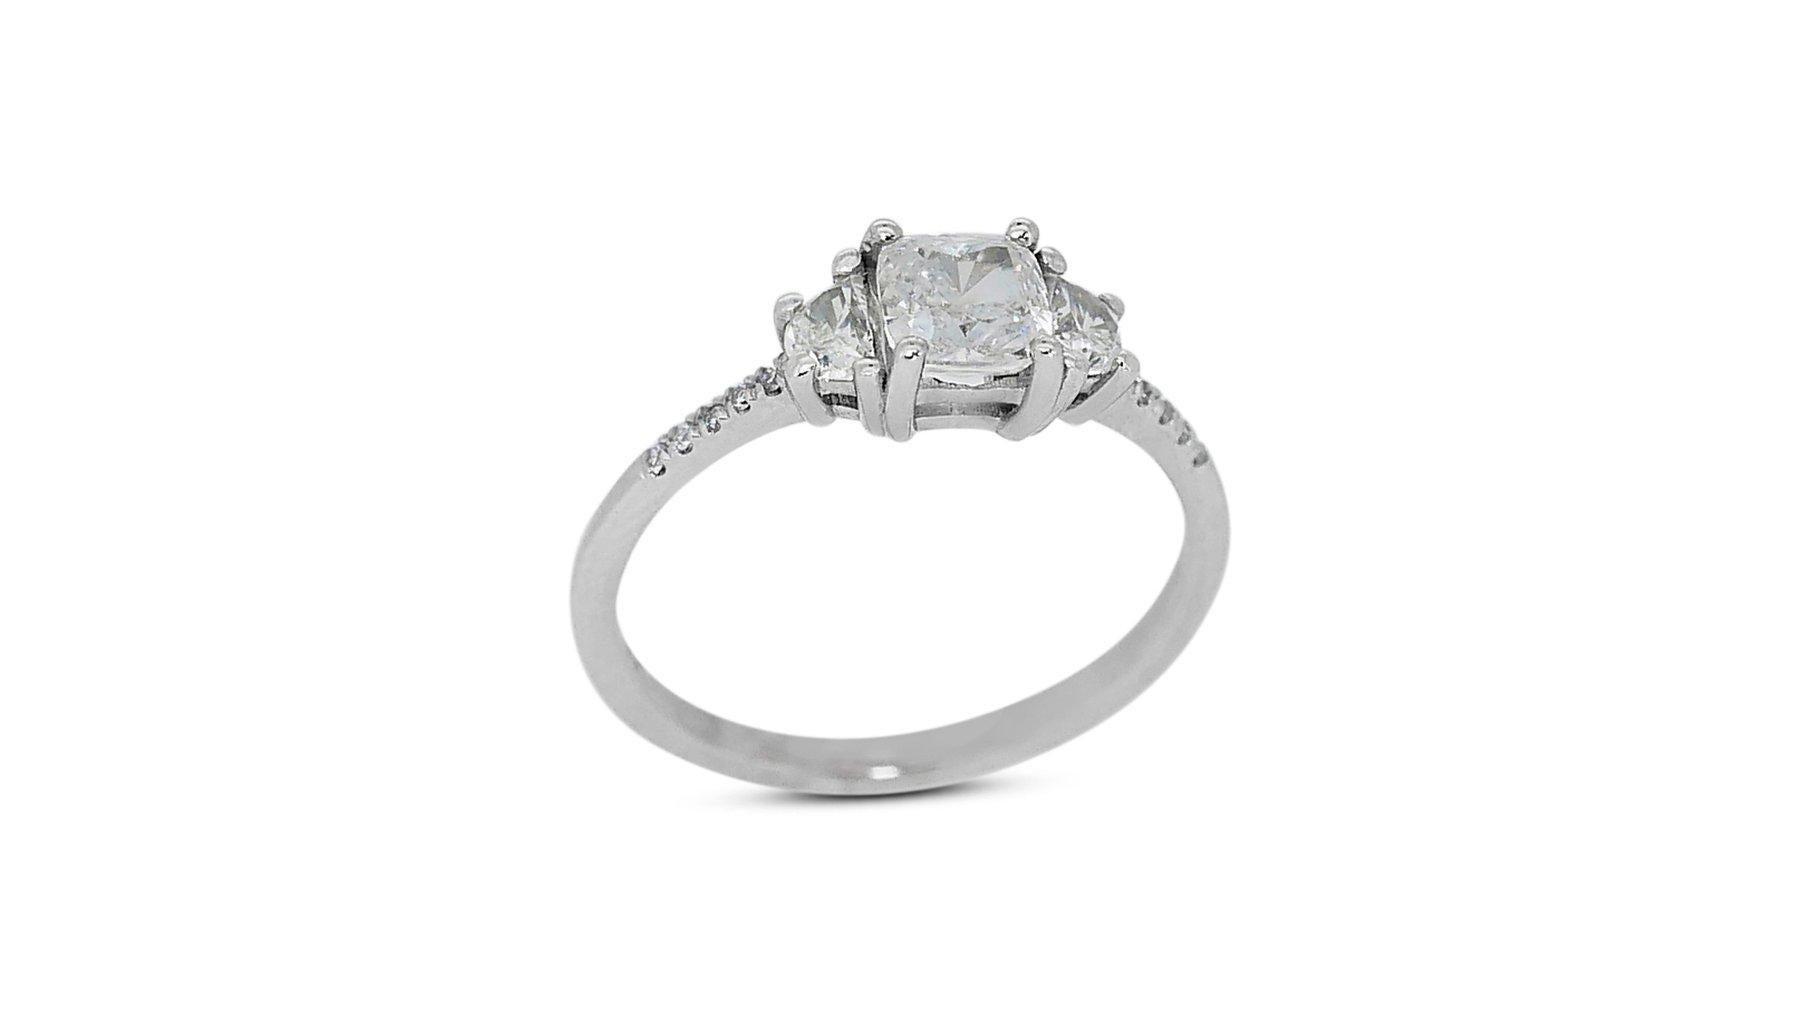 Captivating 18K White Gold Natural Diamond Halo Ring w/1.31 Carat- GIA Certified For Sale 1